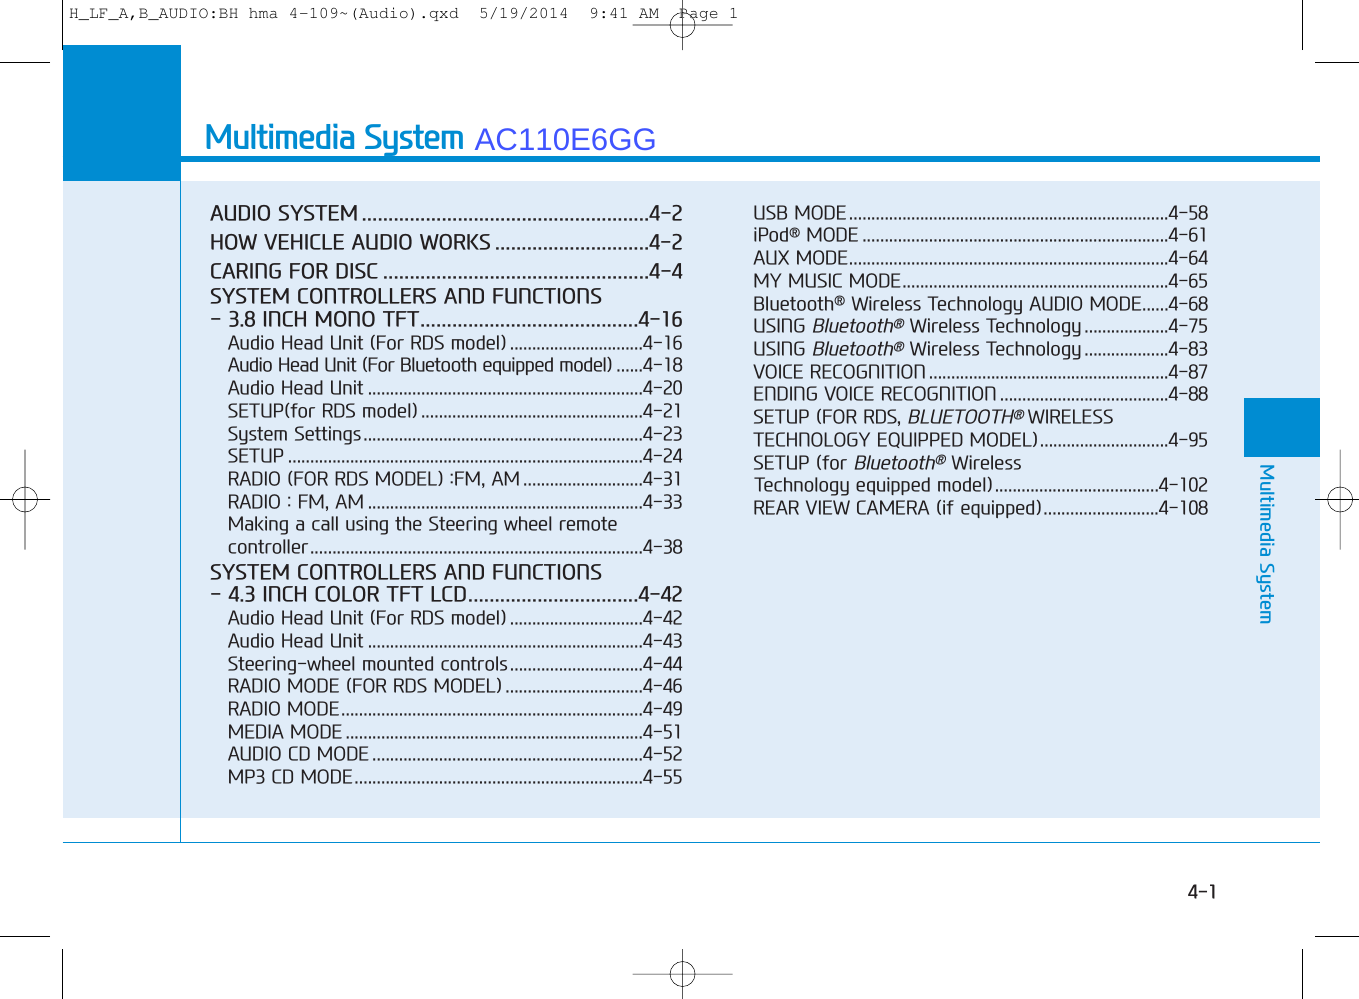 Multimedia SystemAUDIO SYSTEM ......................................................4-2HOW VEHICLE AUDIO WORKS .............................4-2CARING FOR DISC ..................................................4-4SYSTEM CONTROLLERS AND FUNCTIONS- 3.8 INCH MONO TFT.........................................4-16Audio Head Unit (For RDS model) ..............................4-16Audio Head Unit (For Bluetooth equipped model) ......4-18Audio Head Unit ..............................................................4-20SETUP(for RDS model) ..................................................4-21System Settings...............................................................4-23SETUP ................................................................................4-24RADIO (FOR RDS MODEL) :FM, AM ...........................4-31RADIO : FM, AM ..............................................................4-33Making a call using the Steering wheel remotecontroller...........................................................................4-38SYSTEM CONTROLLERS AND FUNCTIONS- 4.3 INCH COLOR TFT LCD................................4-42Audio Head Unit (For RDS model) ..............................4-42Audio Head Unit ..............................................................4-43Steering-wheel mounted controls..............................4-44RADIO MODE (FOR RDS MODEL) ...............................4-46RADIO MODE....................................................................4-49MEDIA MODE ...................................................................4-51AUDIO CD MODE .............................................................4-52MP3 CD MODE.................................................................4-55USB MODE........................................................................4-58iPod®MODE .....................................................................4-61AUX MODE........................................................................4-64MY MUSIC MODE............................................................4-65Bluetooth®Wireless Technology AUDIO MODE......4-68USING Bluetooth®Wireless Technology ...................4-75USING Bluetooth®Wireless Technology ...................4-83VOICE RECOGNITION ......................................................4-87 ENDING VOICE RECOGNITION ......................................4-88SETUP (FOR RDS, BLUETOOTH®WIRELESSTECHNOLOGY EQUIPPED MODEL).............................4-95SETUP (for Bluetooth®Wireless Technology equipped model).....................................4-102REAR VIEW CAMERA (if equipped)..........................4-10844Multimedia System4-1H_LF_A,B_AUDIO:BH hma 4-109~(Audio).qxd  5/19/2014  9:41 AM  Page 1AC110E6GG